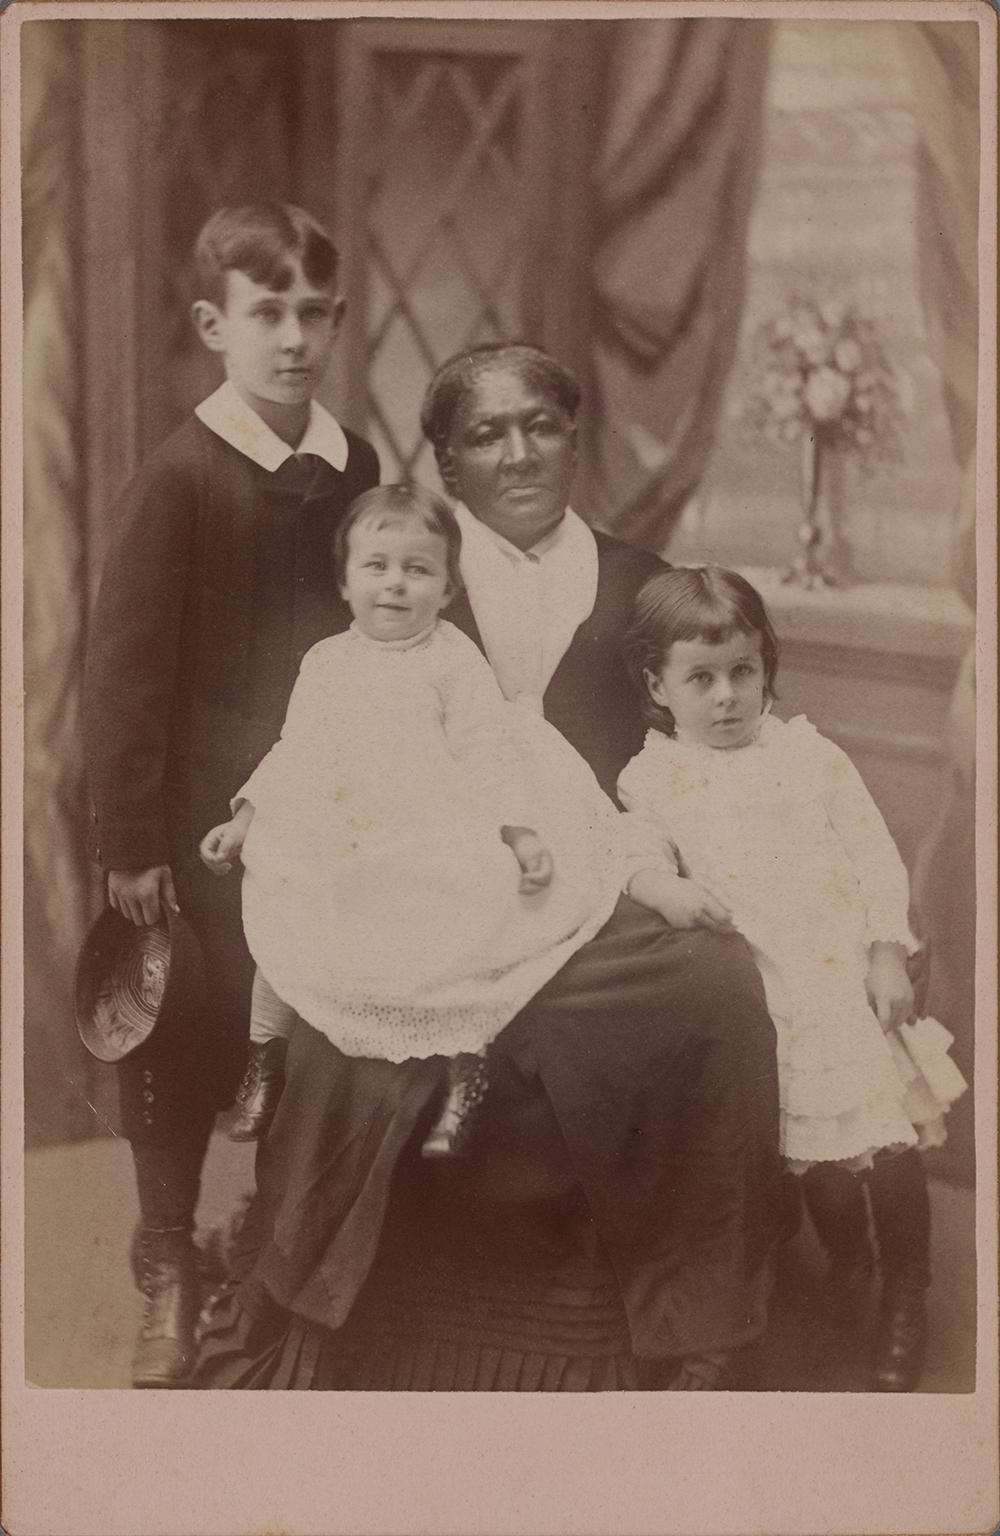 Photograph of an elderly Black woman seated surrounded by a white infant seated on the woman’s proper right knee, a young white girl resting against the woman at her proper left, and a young white boy standing at the woman’s proper right. All subjects are against a studio photography backdrop